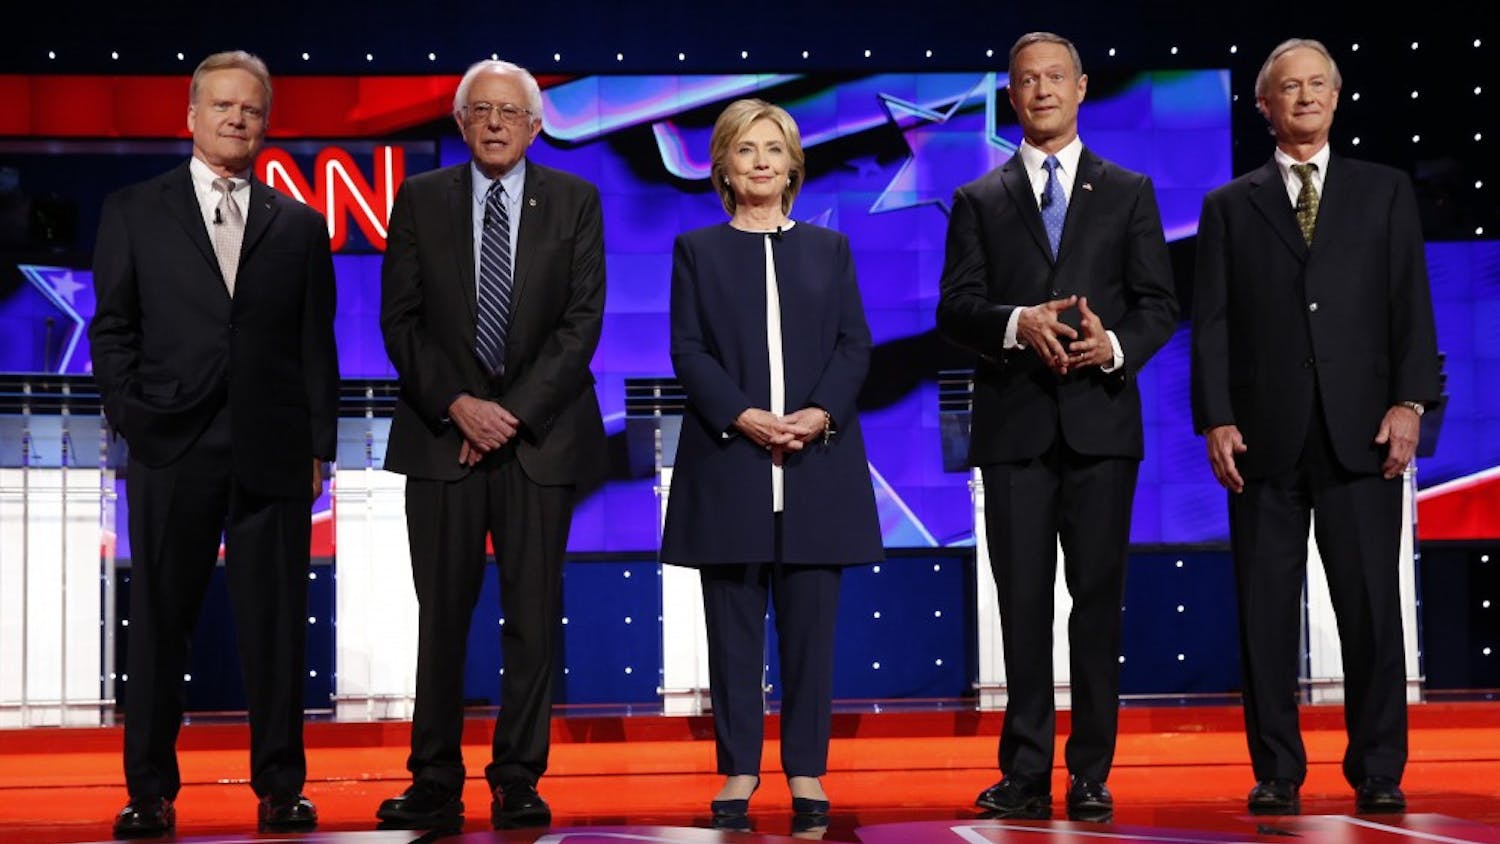 From left, Democratic presidential candidates Jim Webb, Bernie Sanders, Hillary Rodham Clinton, Martin O'Malley and Lincoln Chafee on the debate stage on Tuesday, Oct. 13, 2015, in Las Vegas. (Josh Haner/NYT/Pool via Zuma Press/TNS)